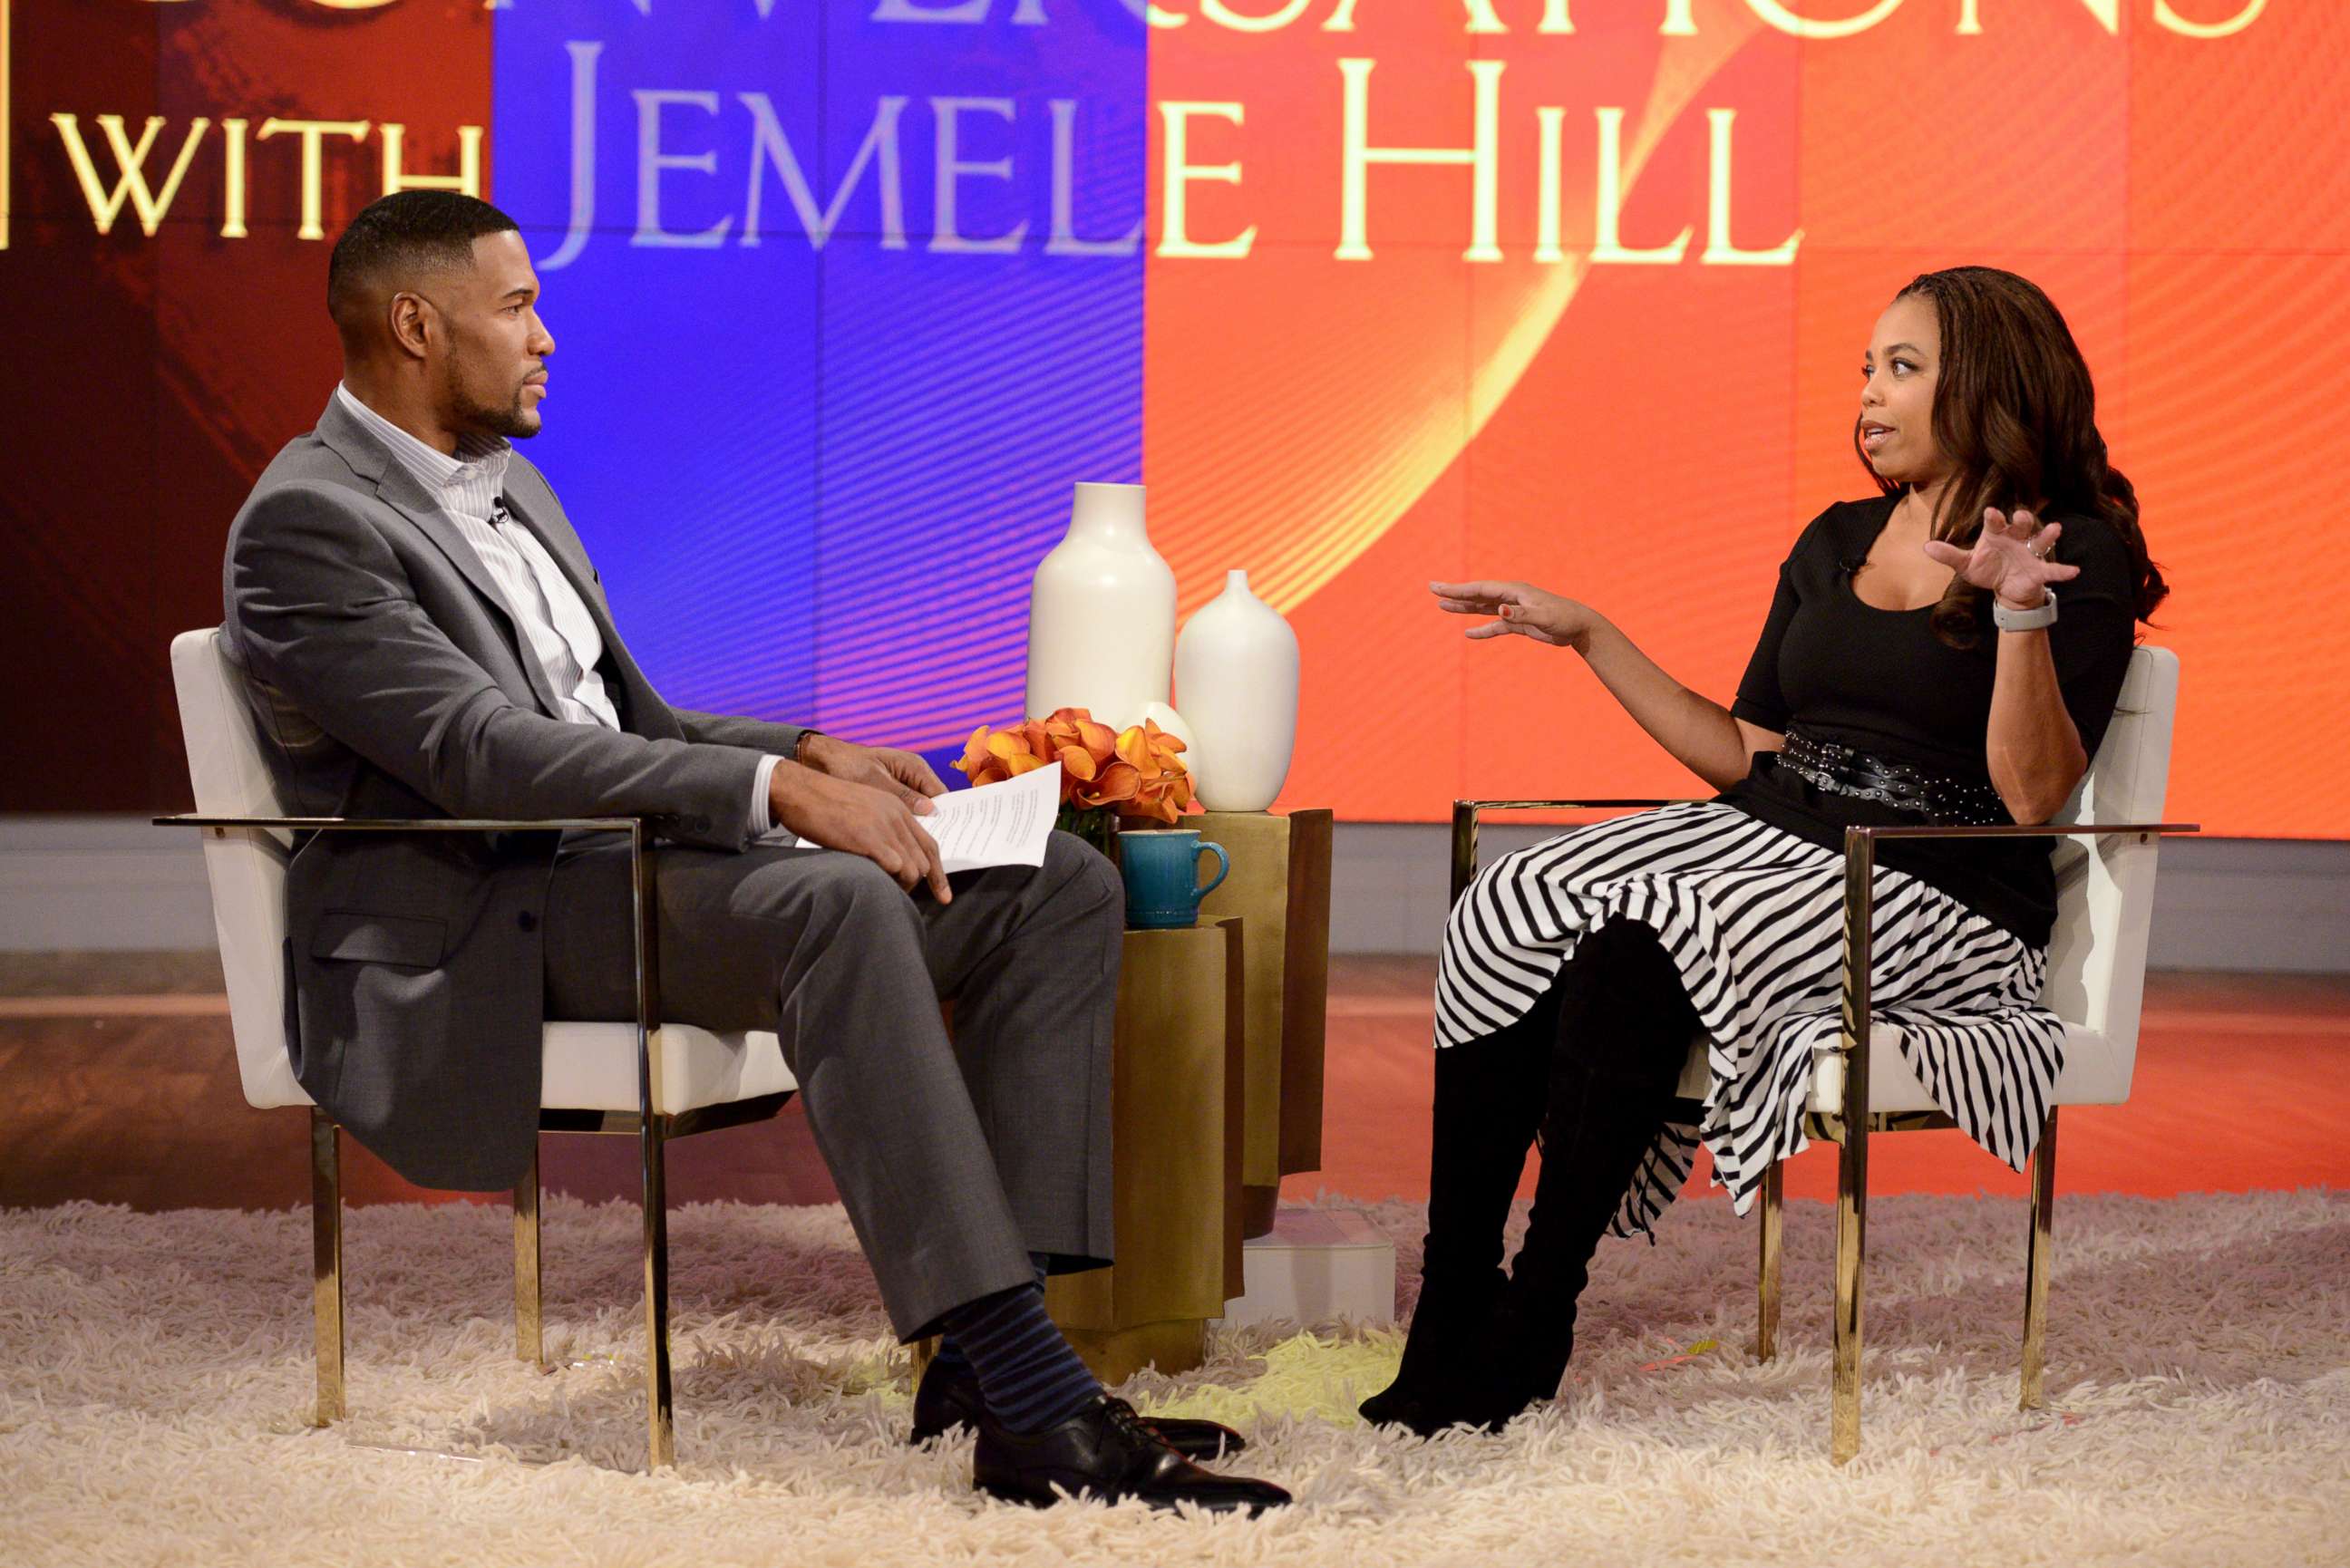 PHOTO: Michael Strahan and Jemele Hill discussed athletes' roles in society.